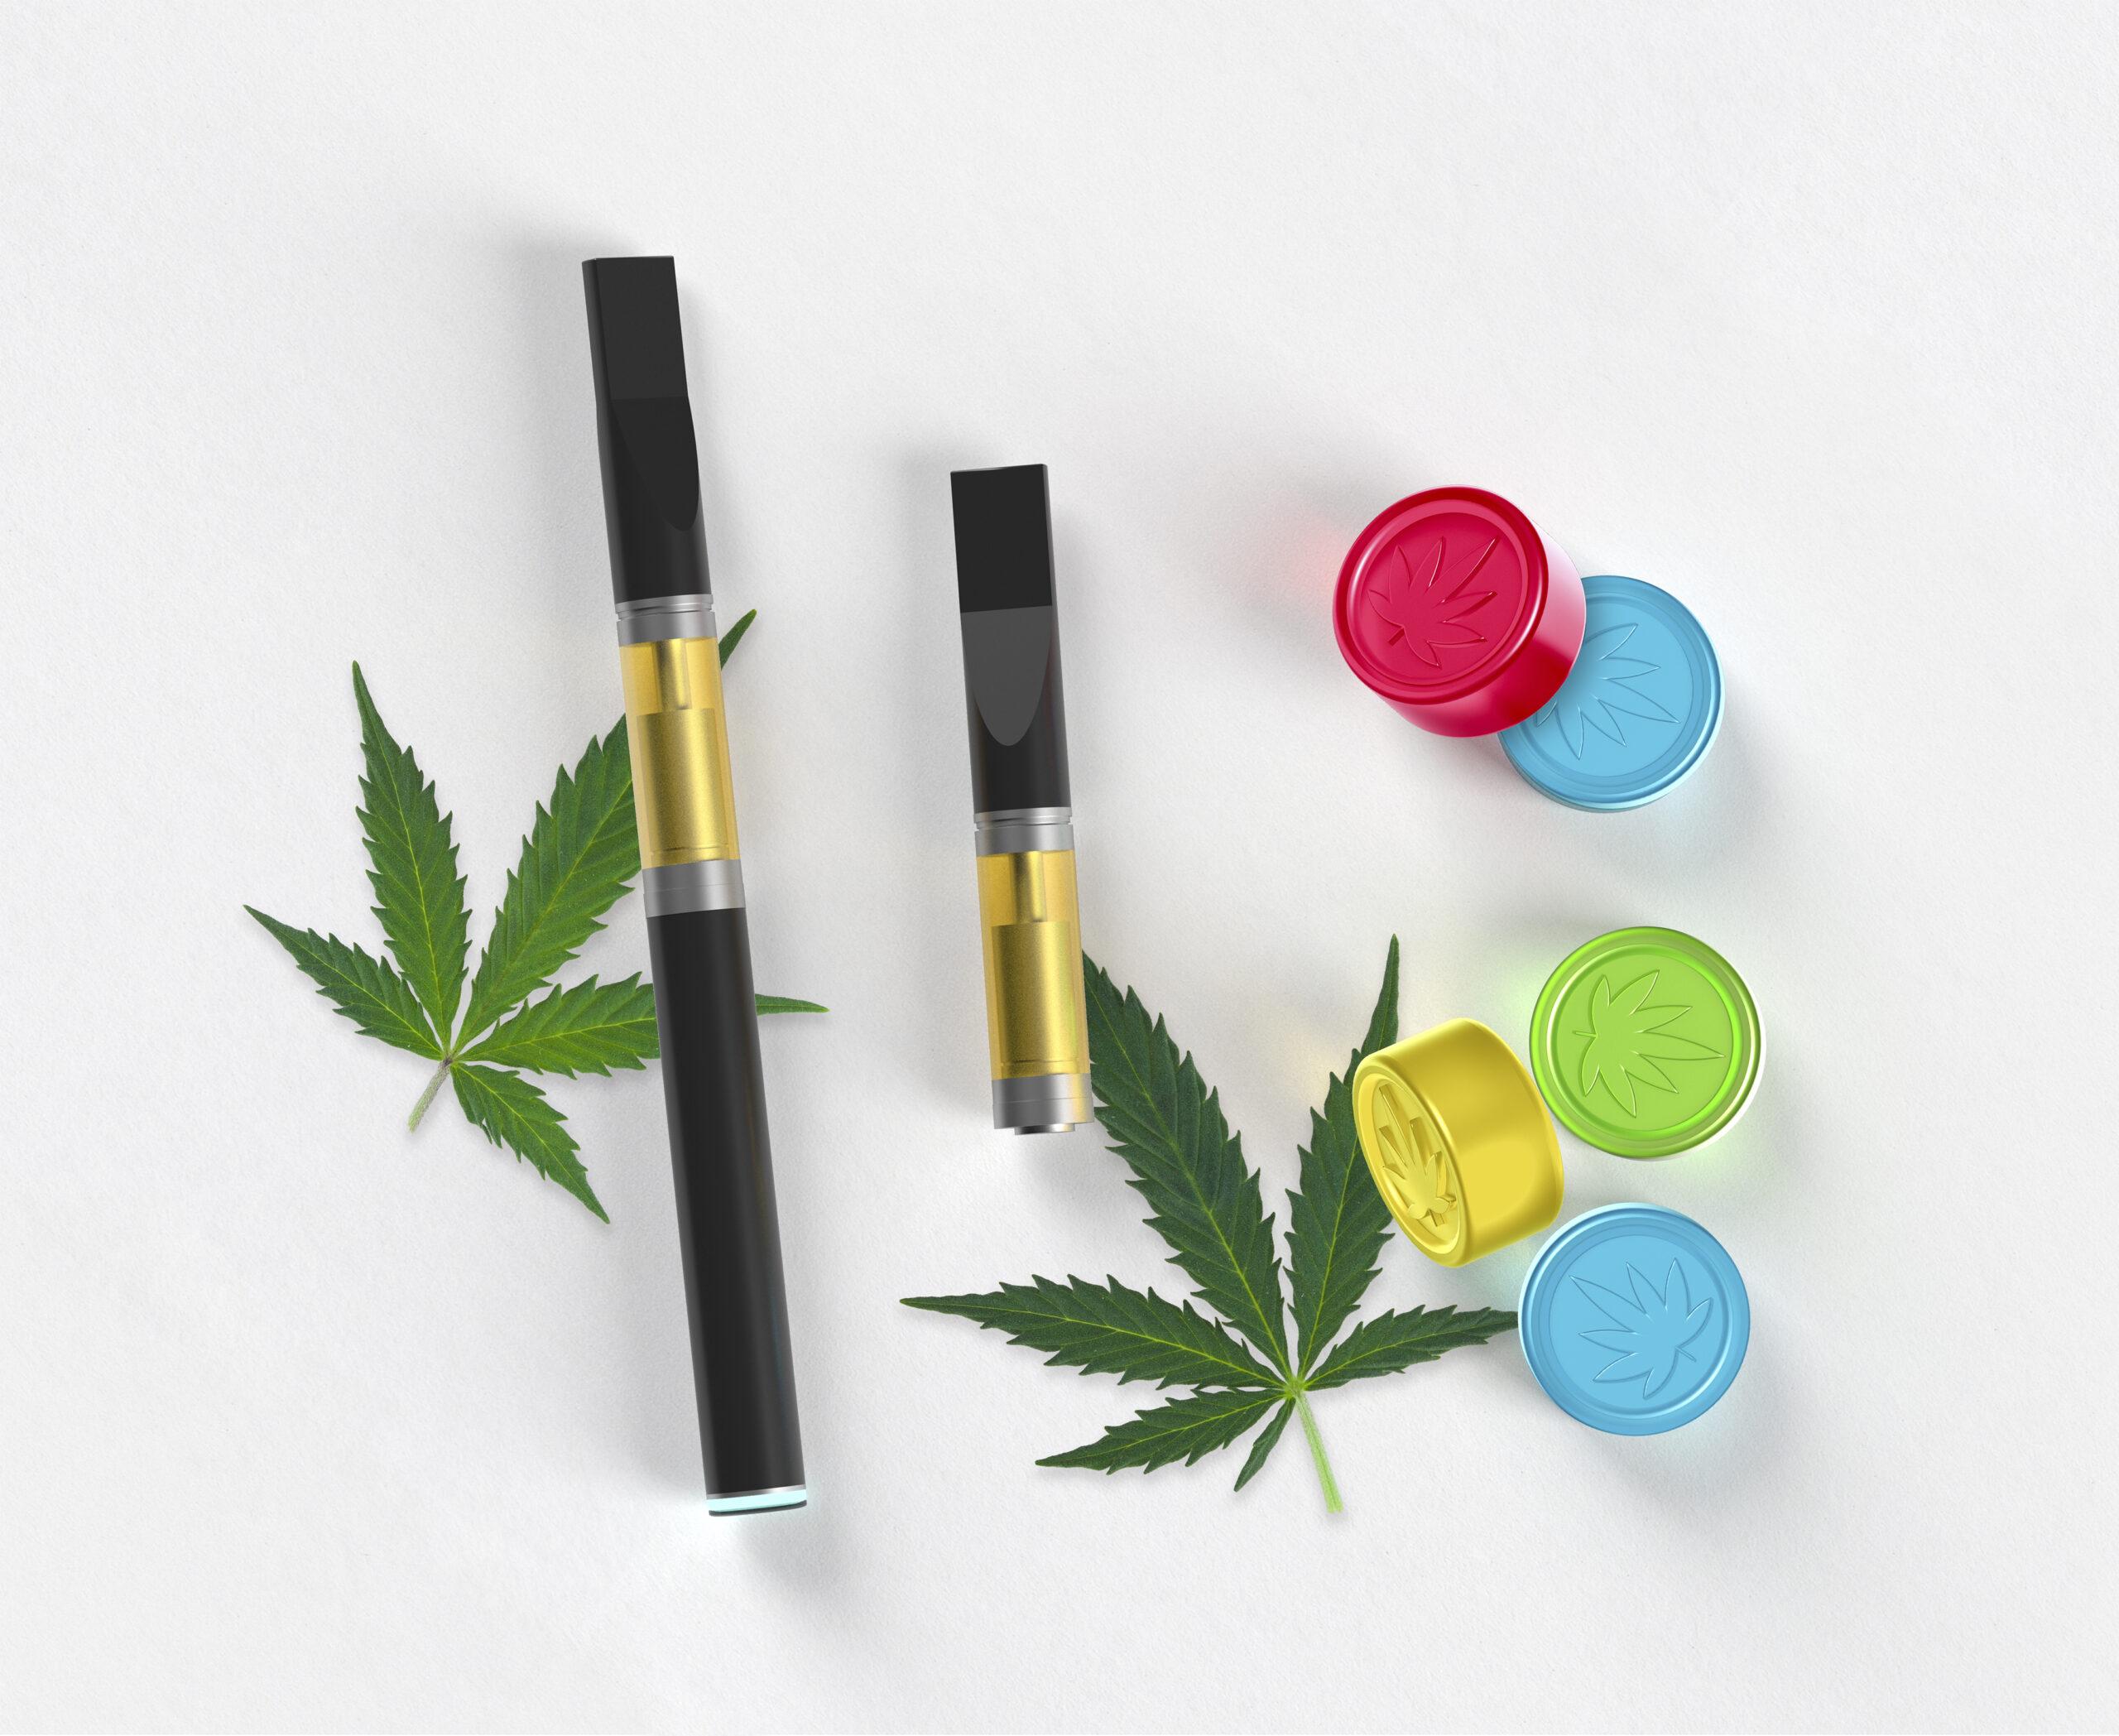 What Is The Most Effective Way To Consume CBD?